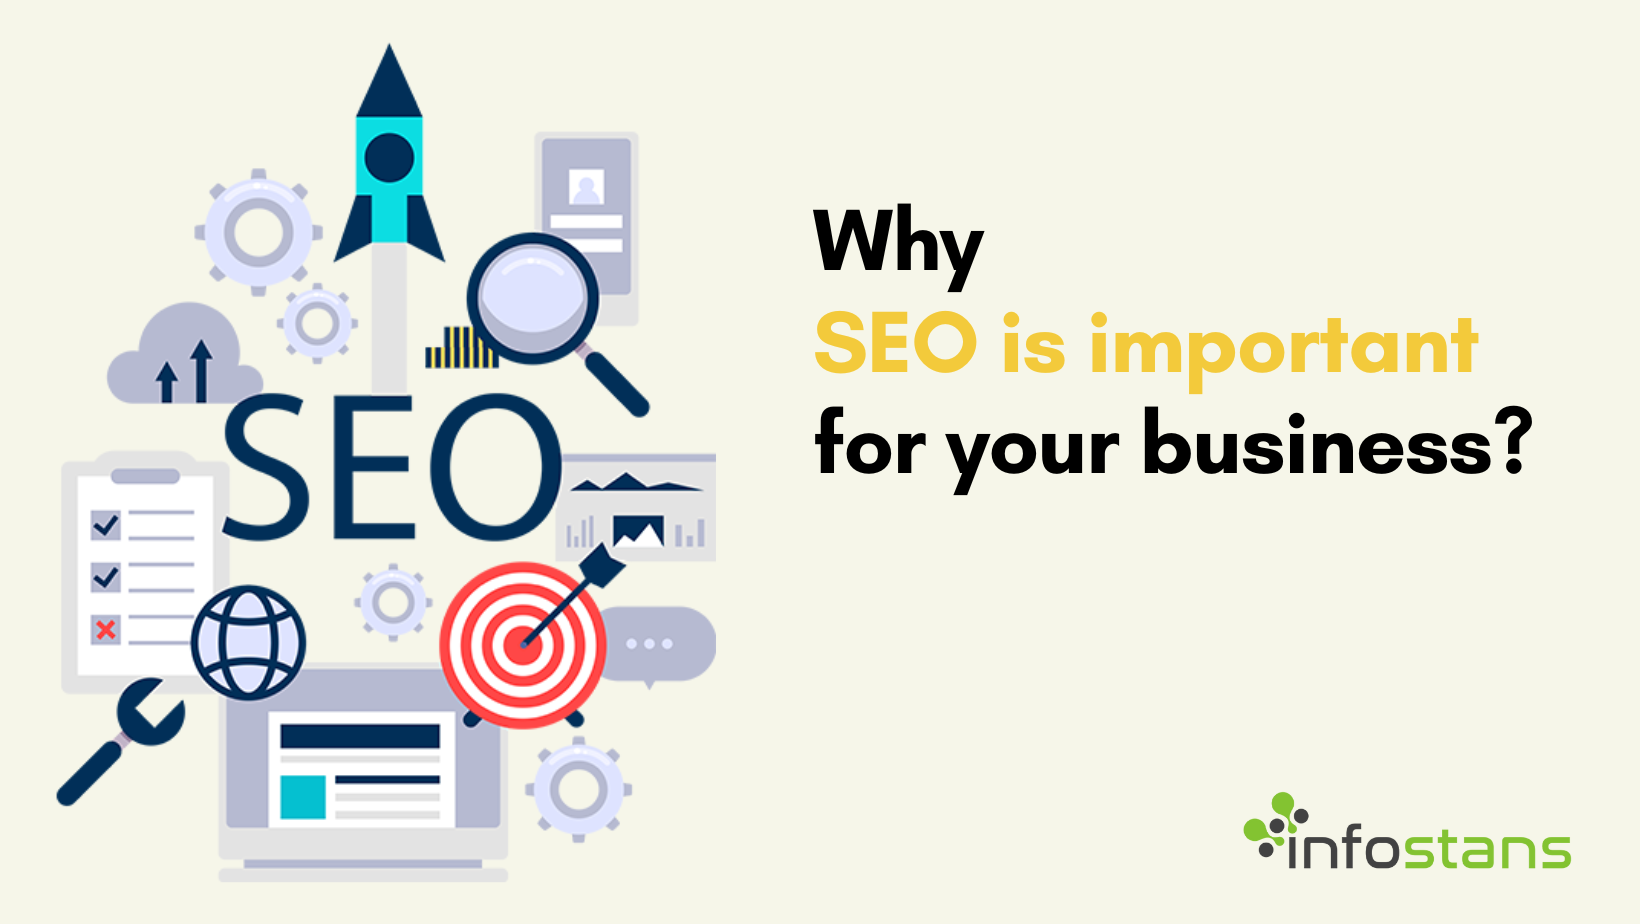 Why SEO Is Important For Your Business?